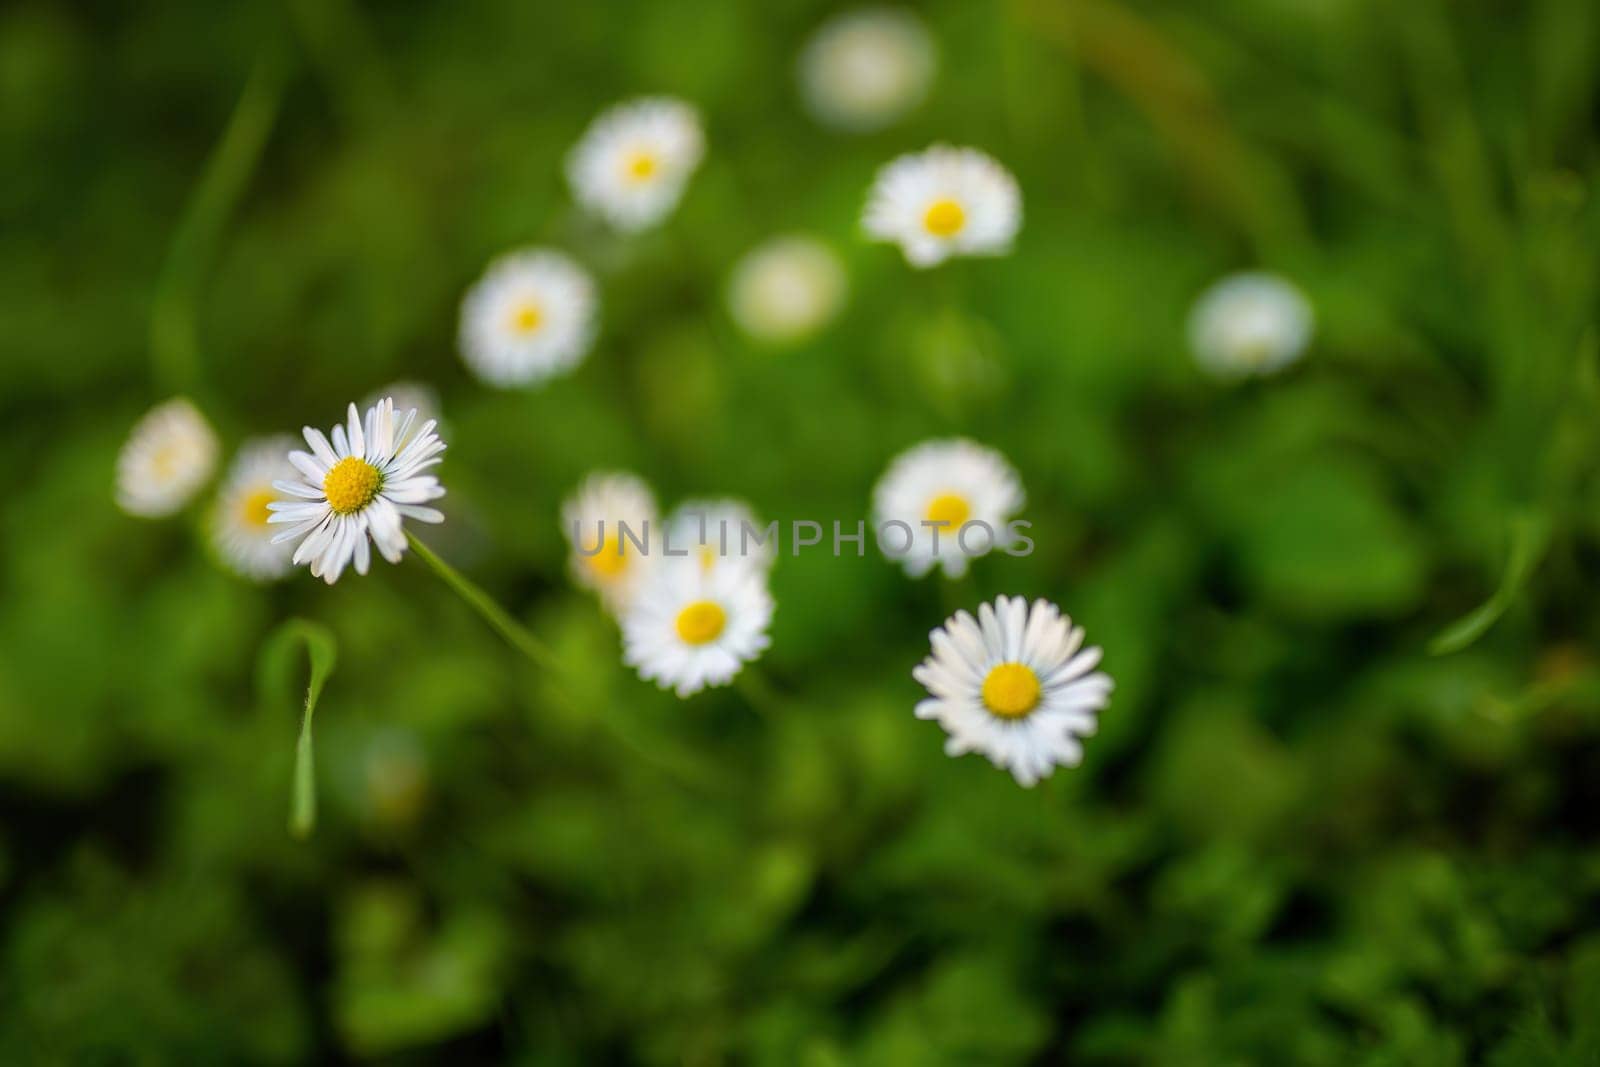 Cluster of Daisies Growing in Grass by pippocarlot